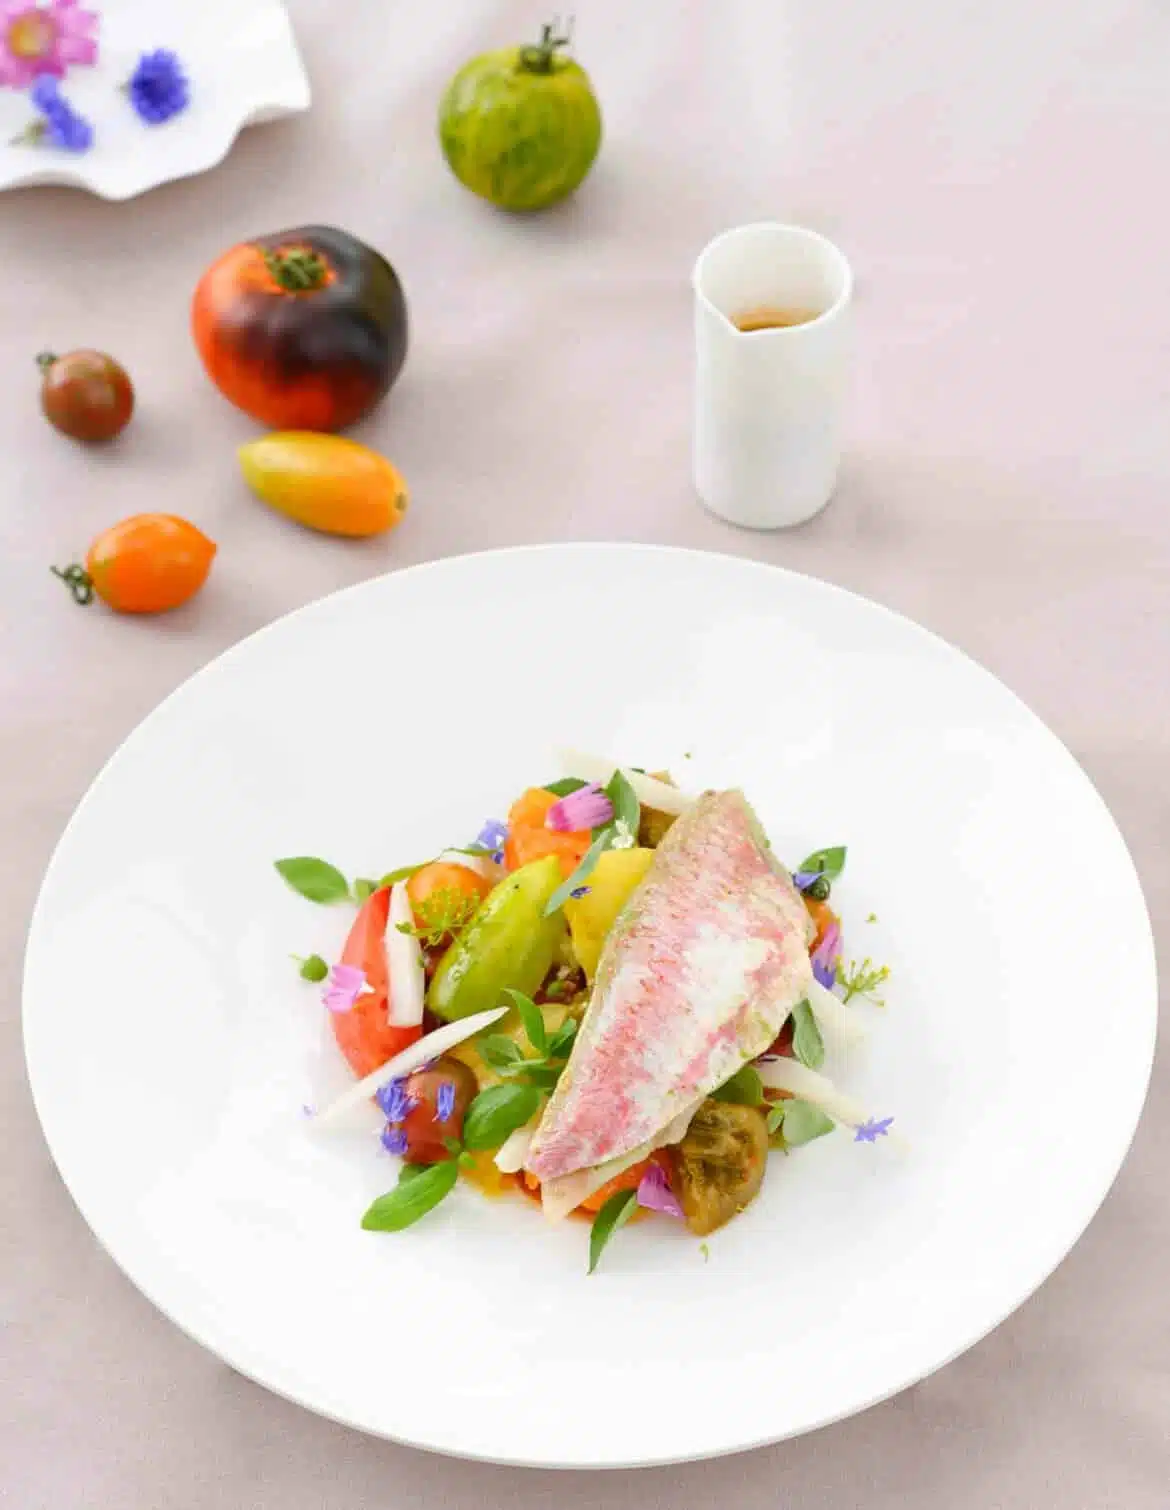 Red mullet fillets with pesto, tomatoes, pickled fennel and flavoured broth by Jérémmy Parjouet